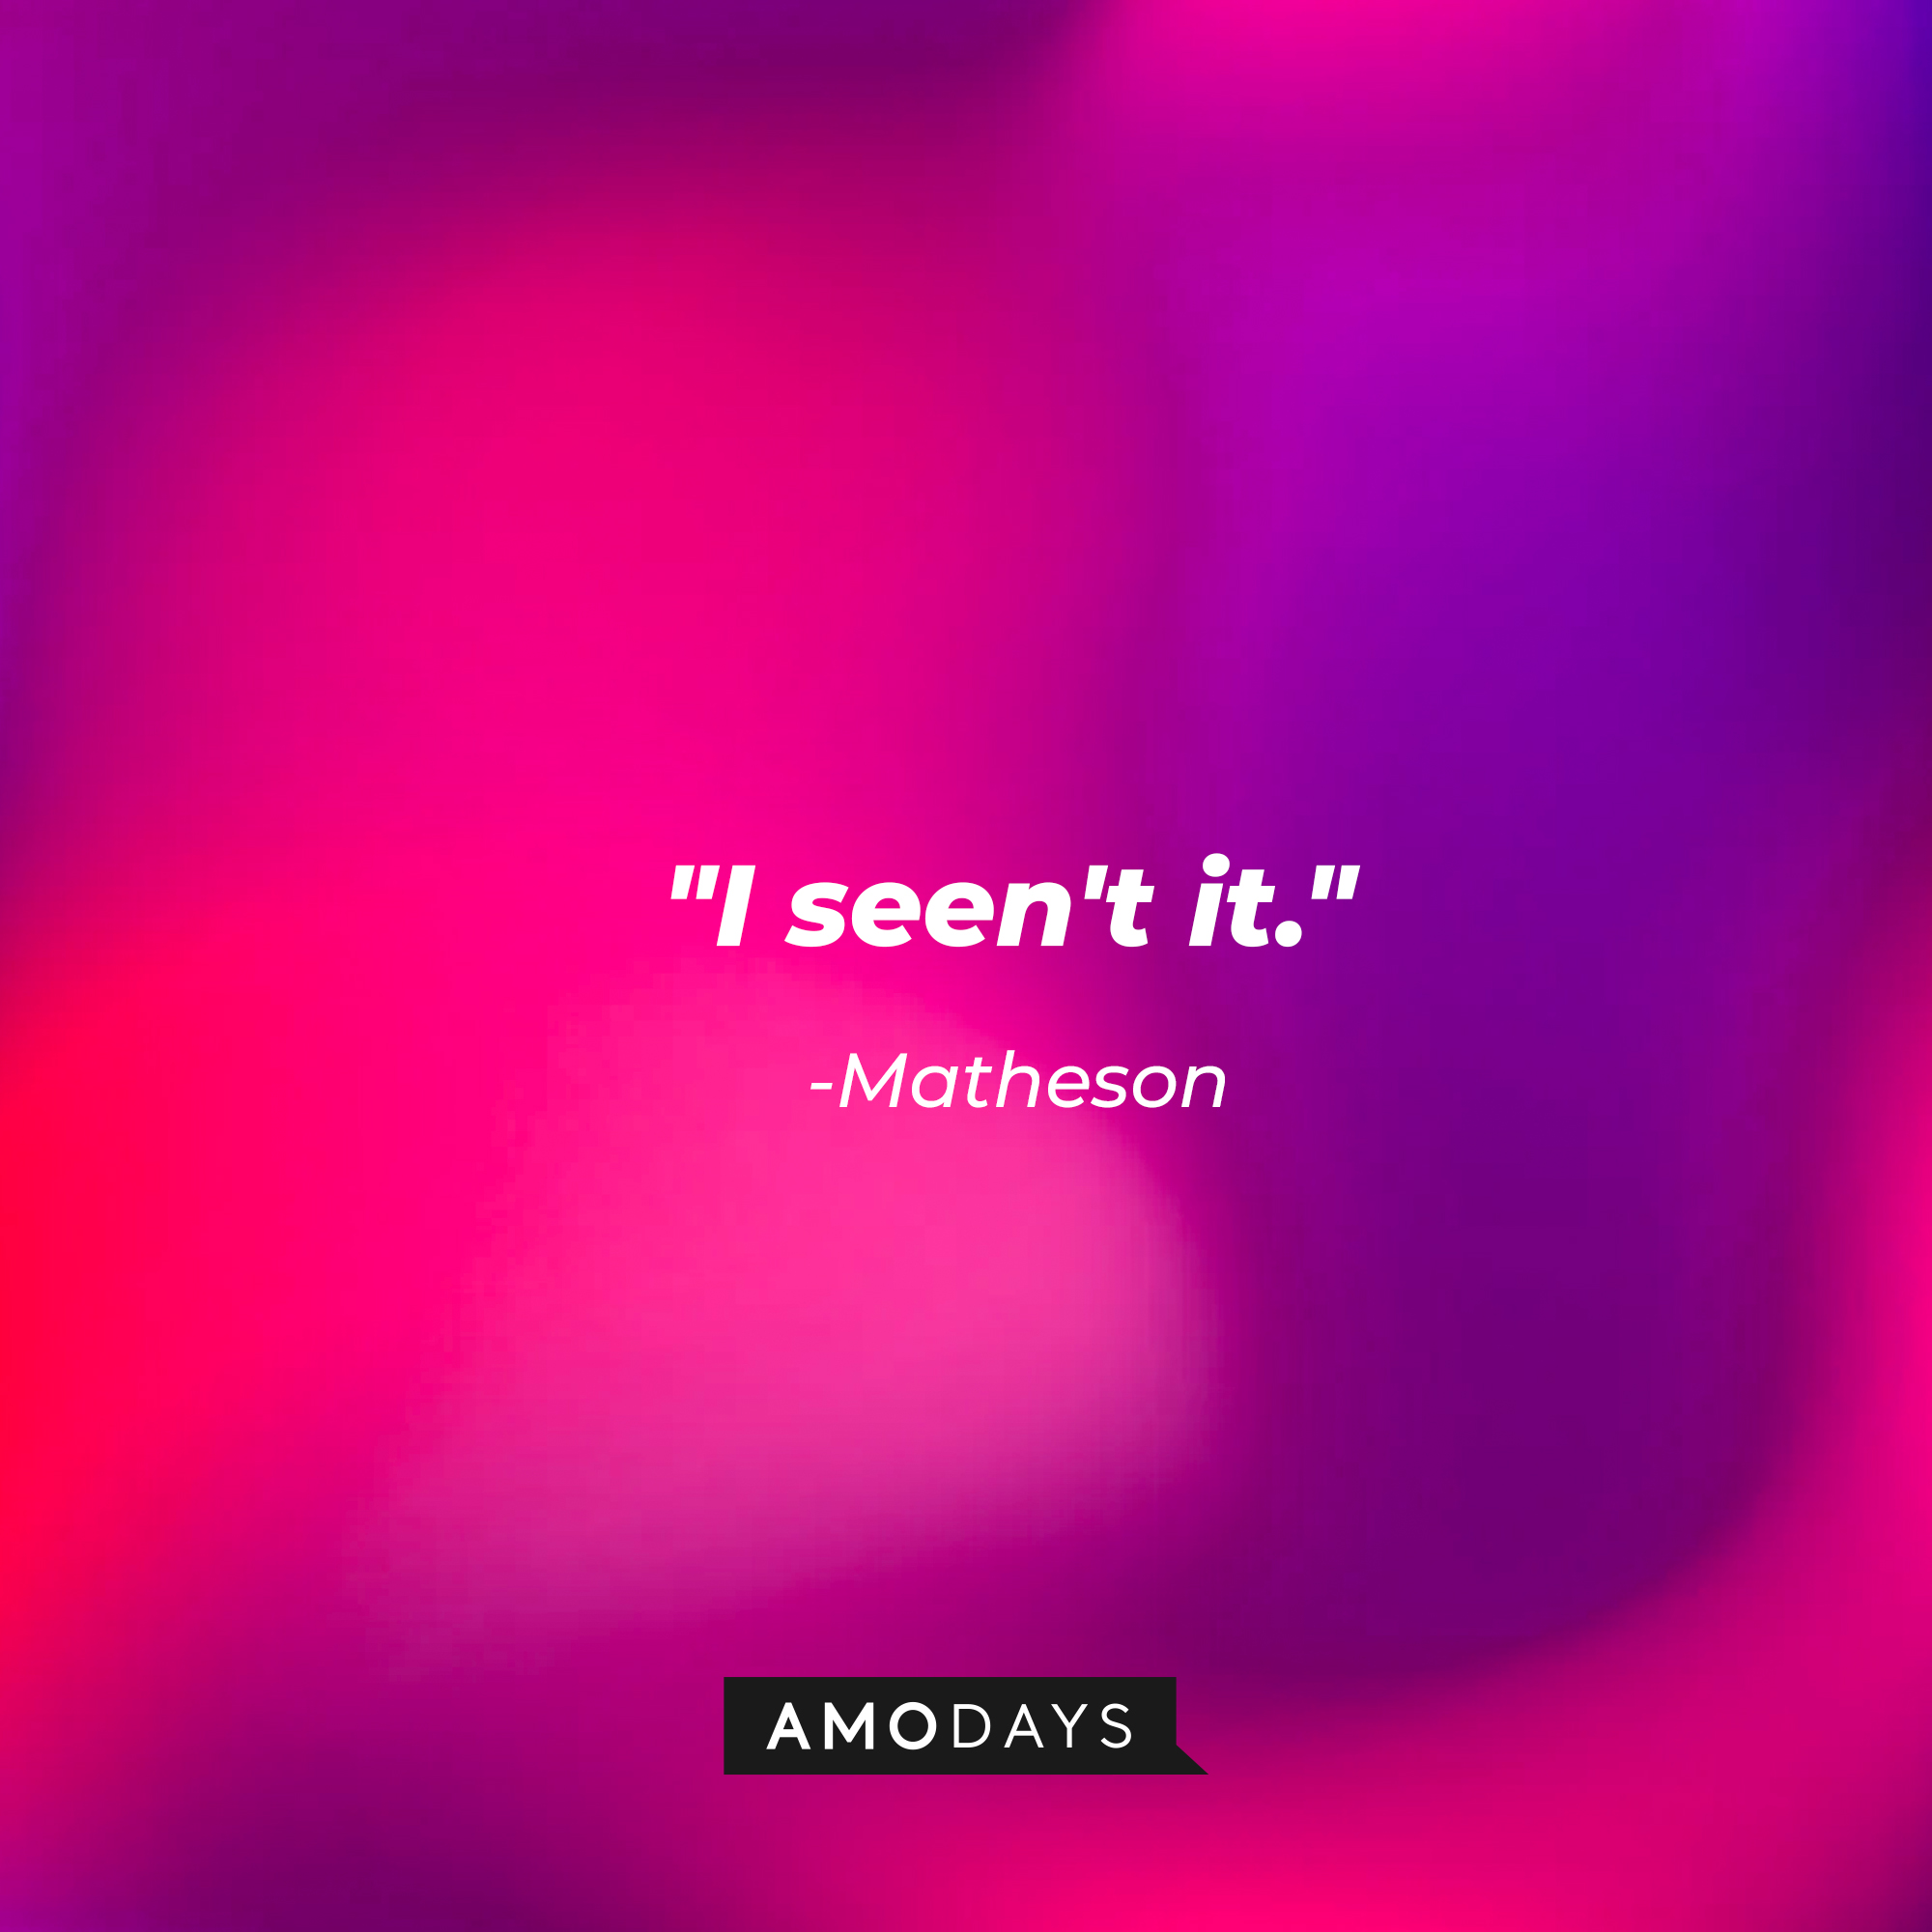 Matheson's quote: "I seen't it." | Source: AmoDays